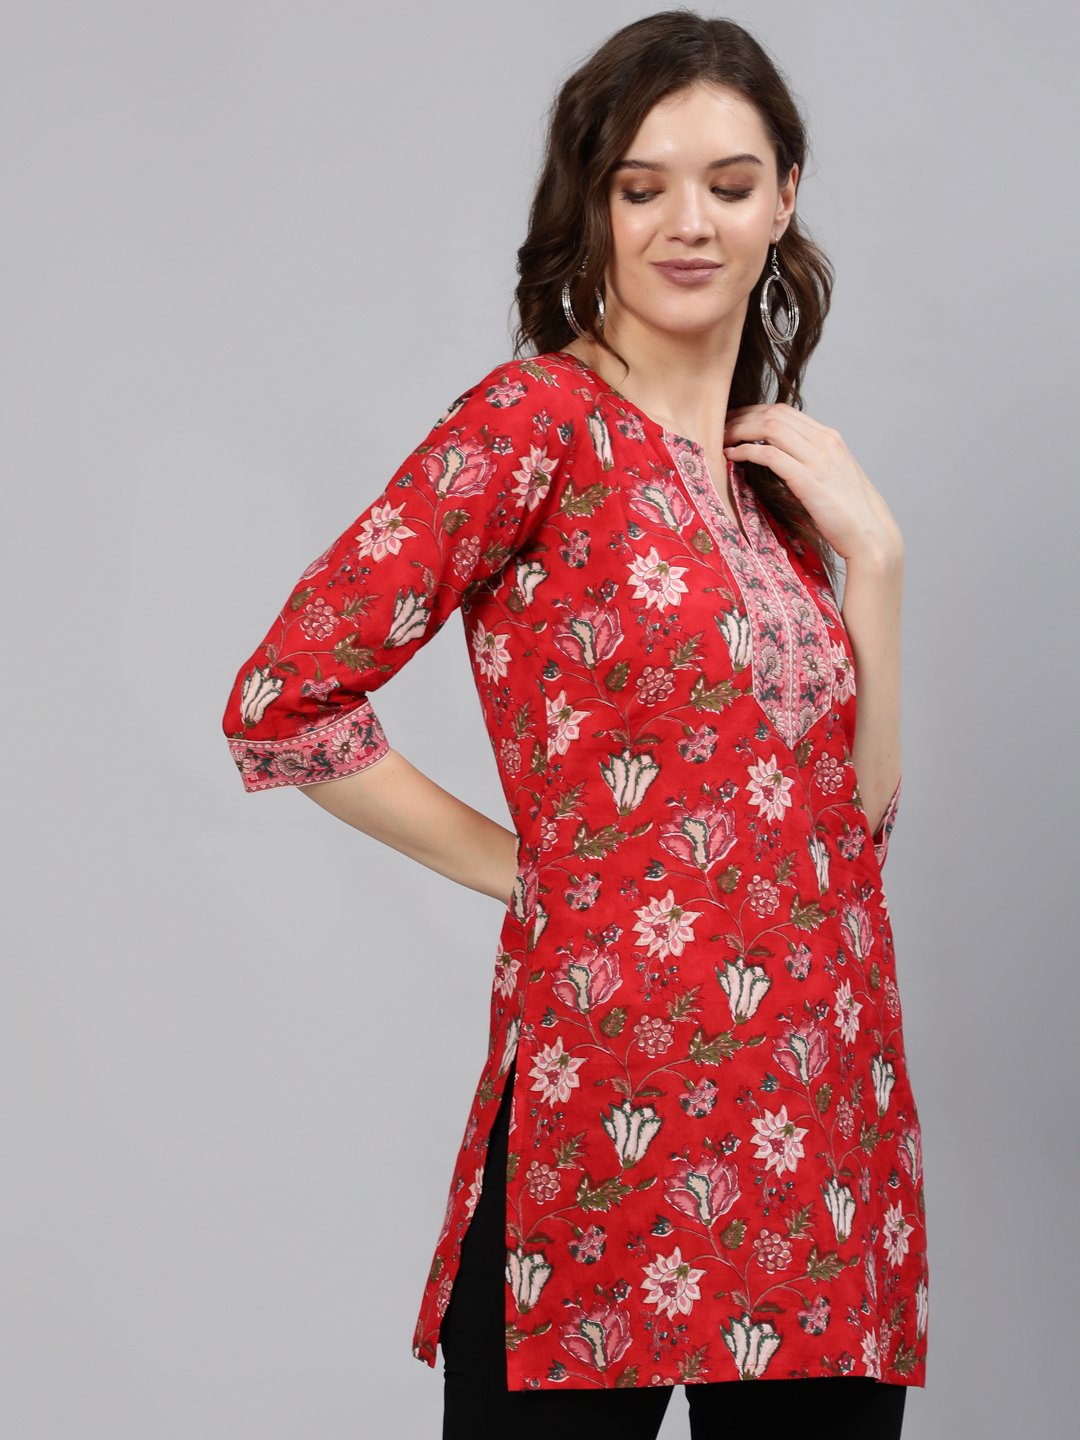 Women's Red Floral Printed Tunic With Three Quarter Sleeves - Nayo Clothing